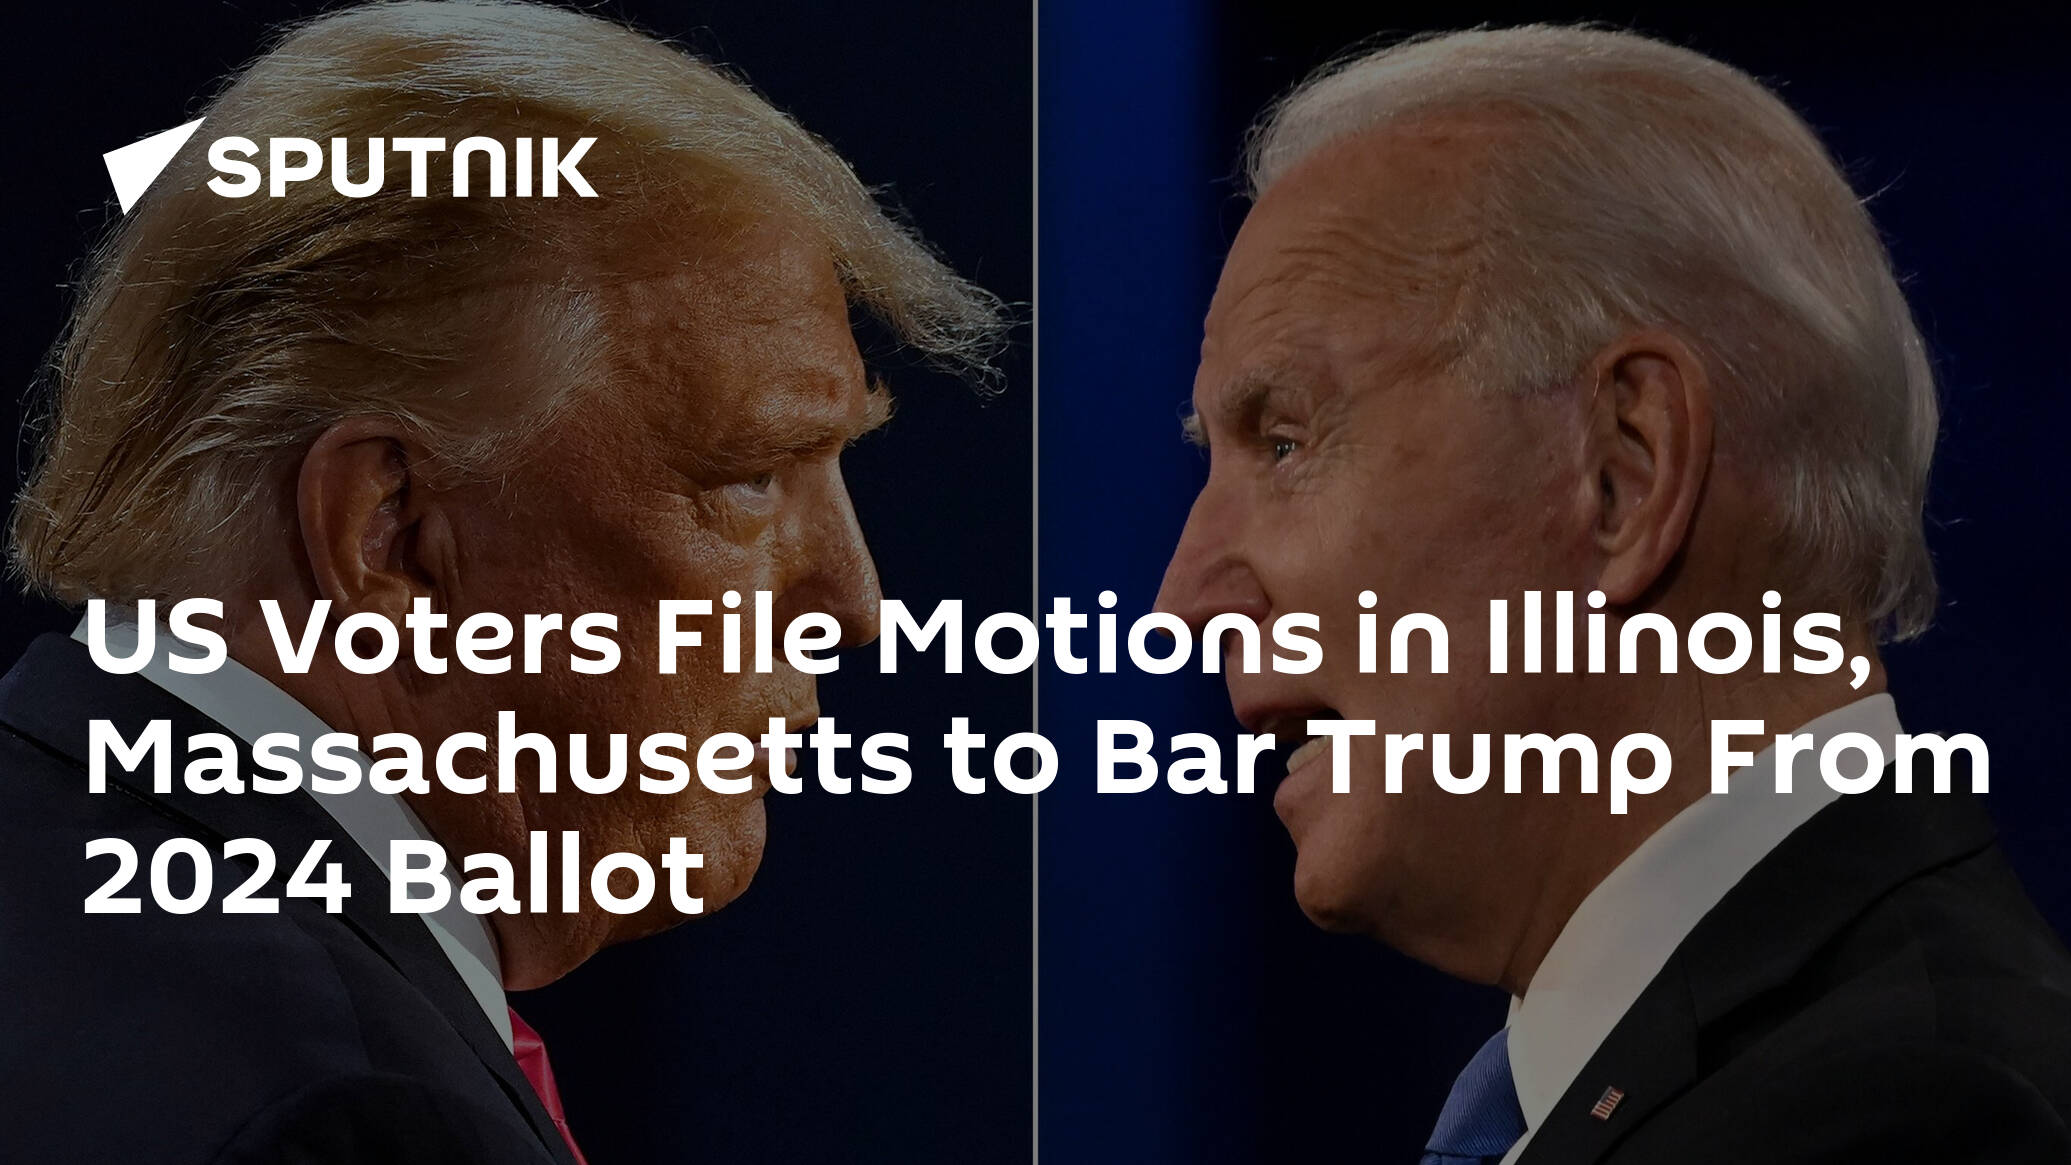 US Voters File Motions in Illinois, Massachusetts to Bar Trump From